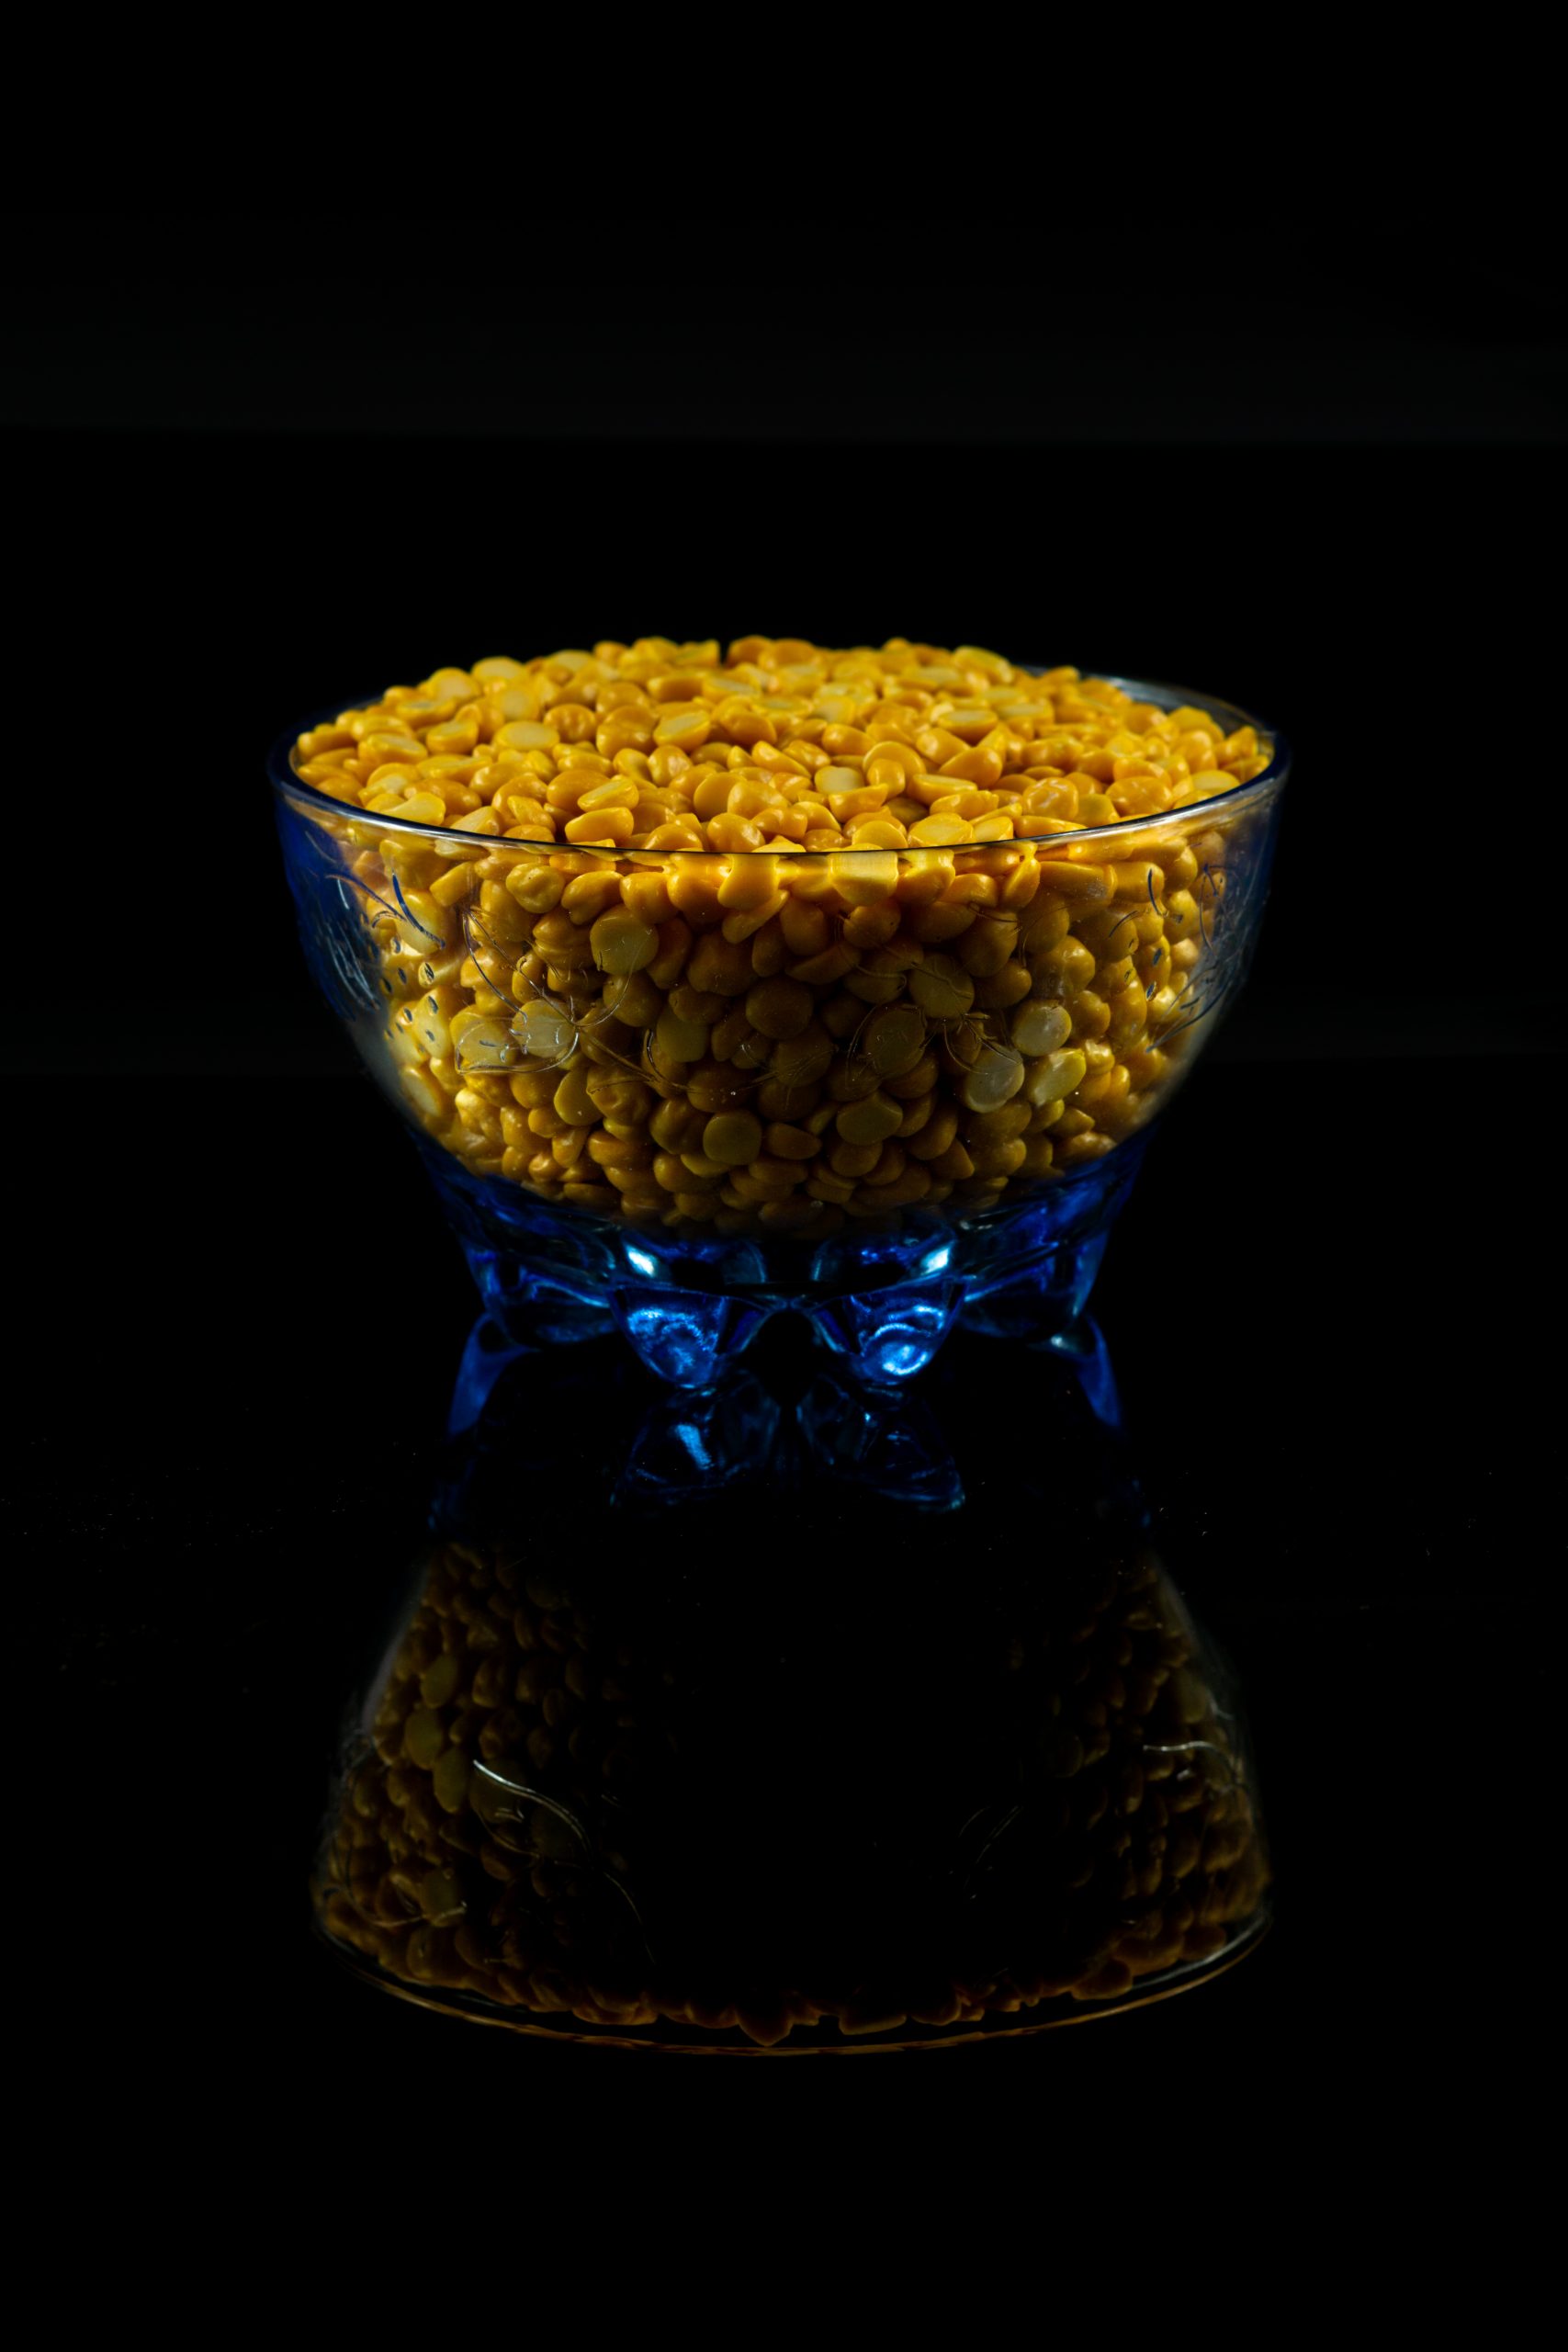 grains in a bowl